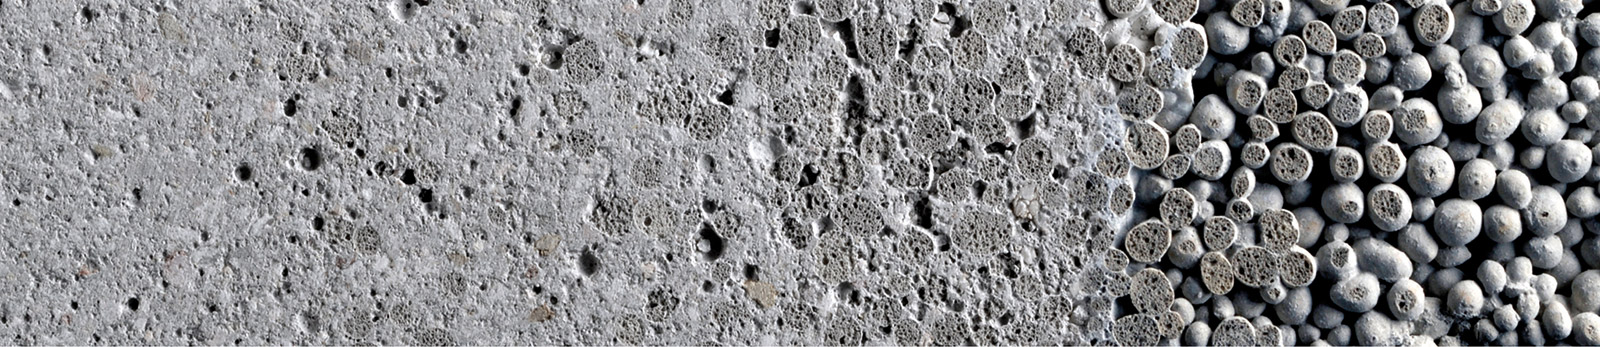 Graded concrete created through  layering process